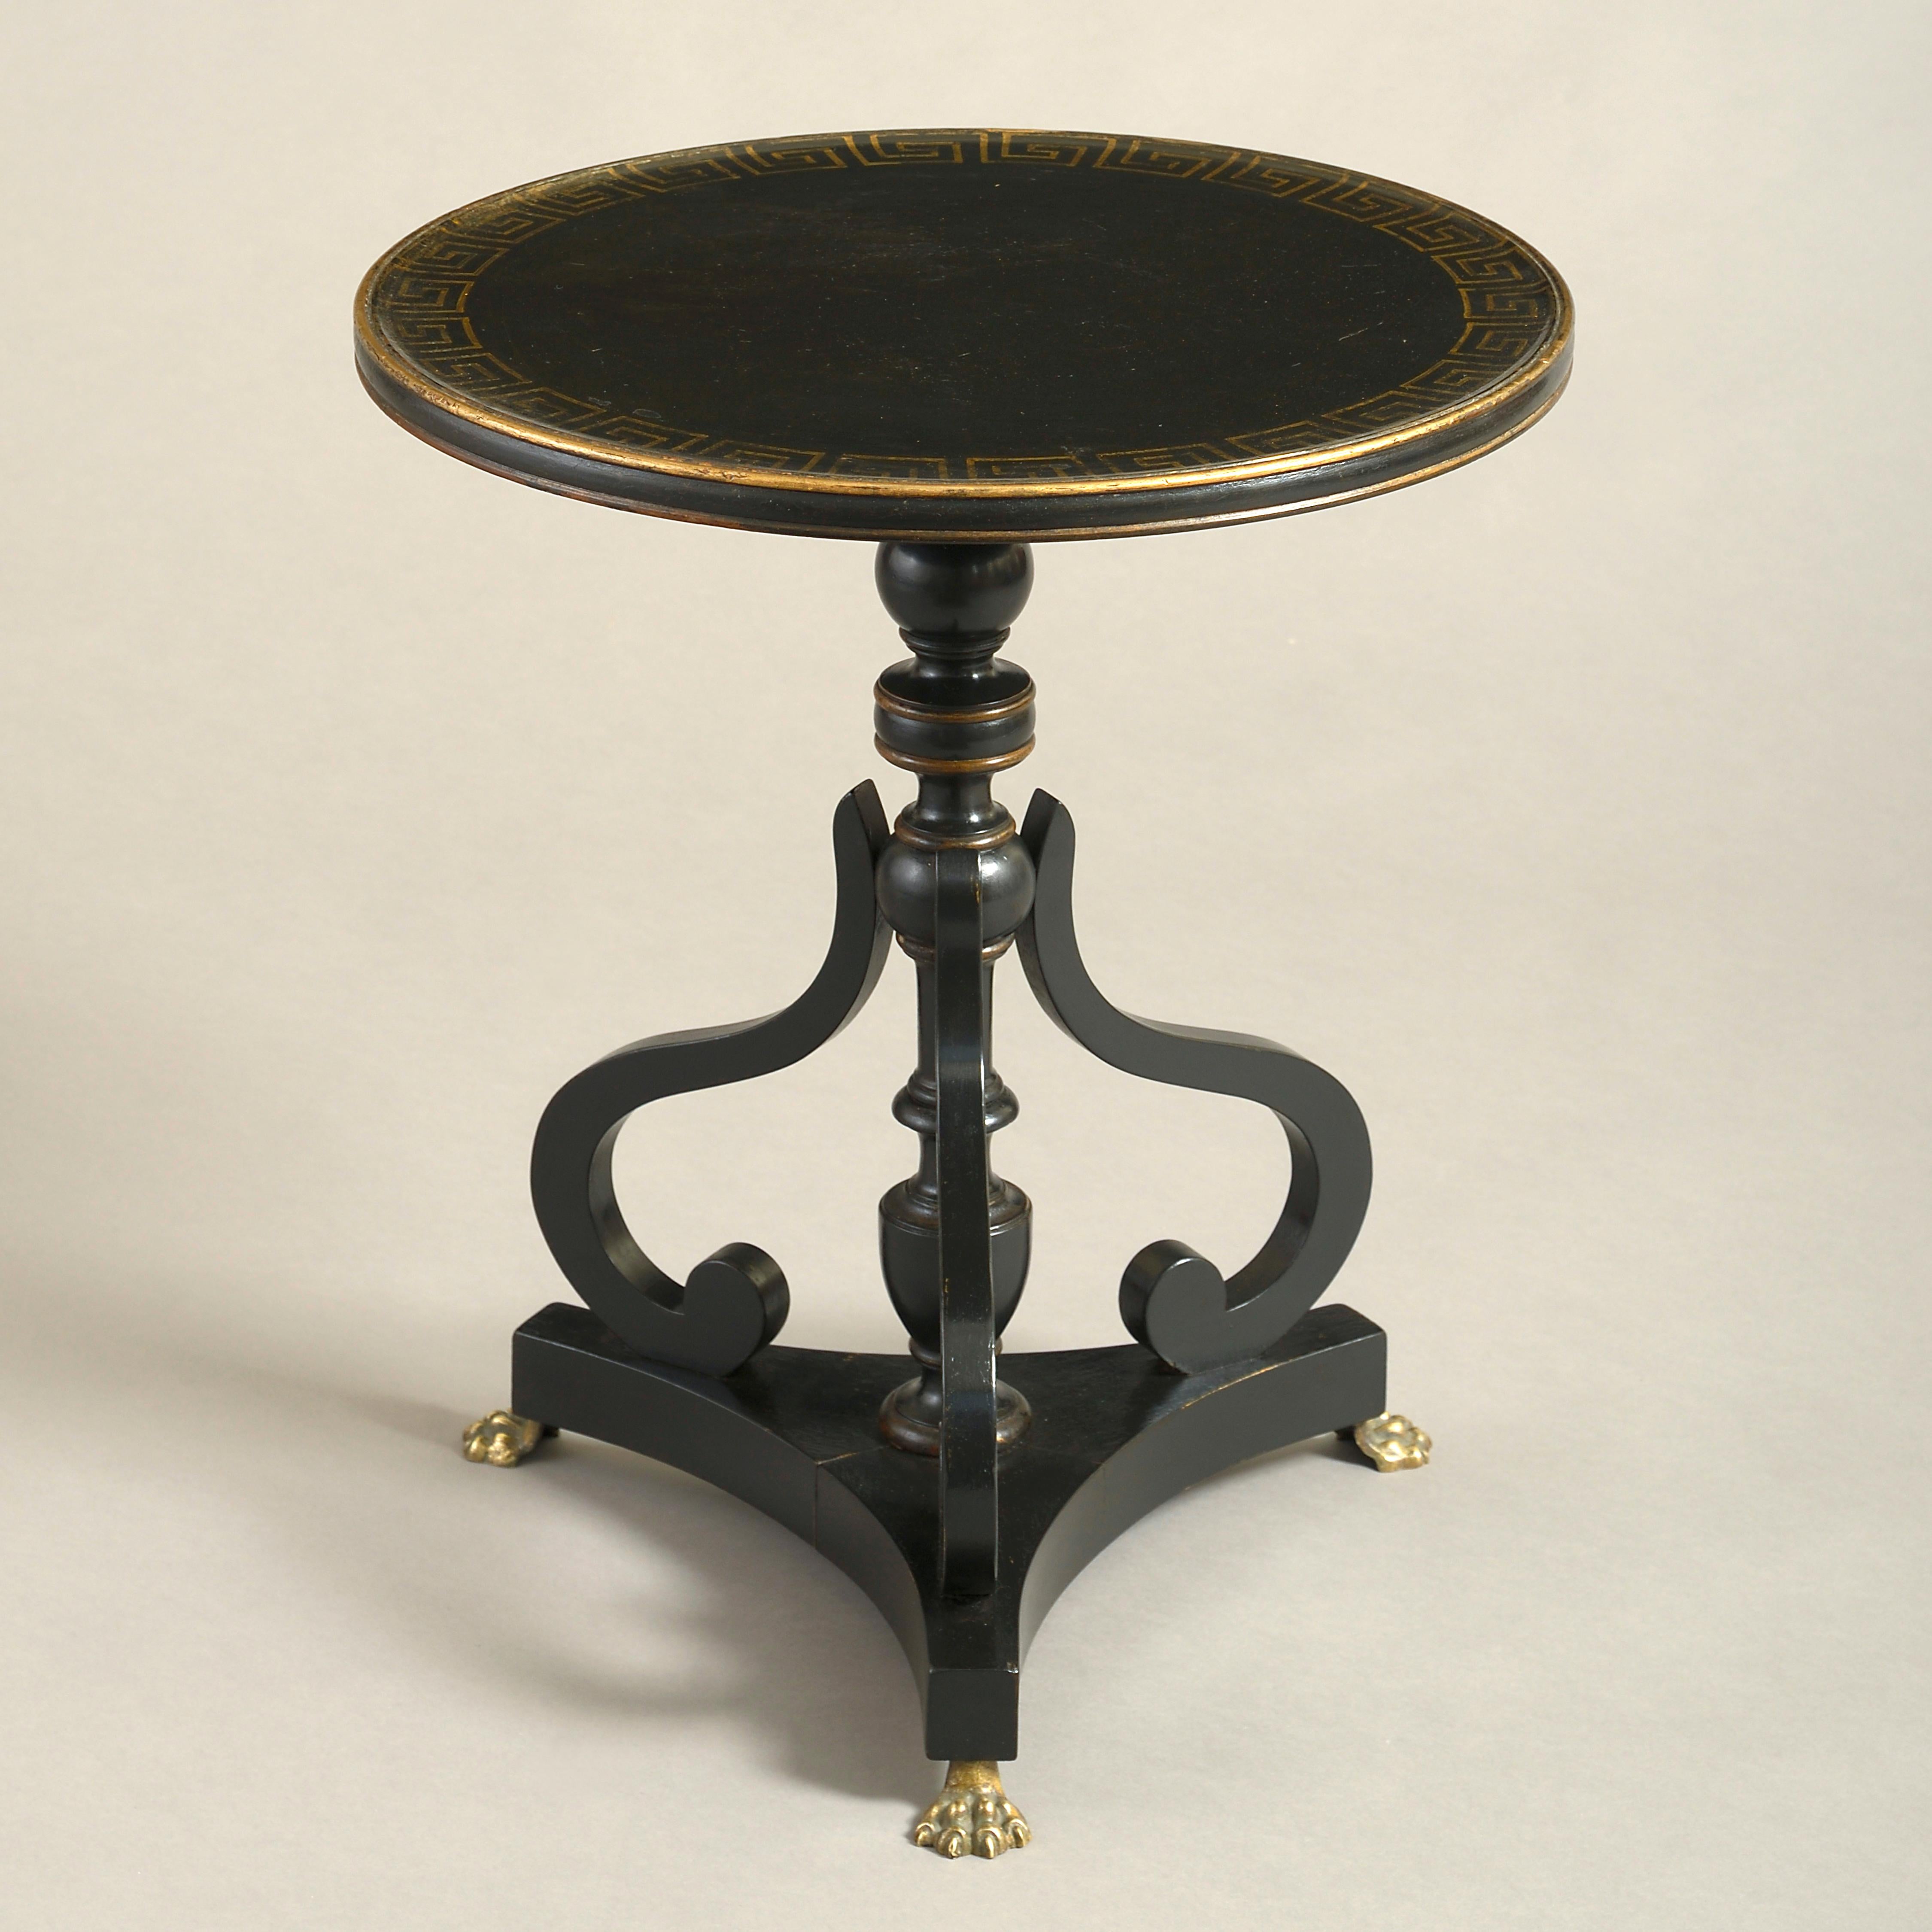 A pair of early 20th century ebonized end tables in the Regency taste, each having a circular dish top with gilded Greek key decoration, upon a turned stem with scrolling supports, set upon a triform concave plinth and terminating in brass paw feet.